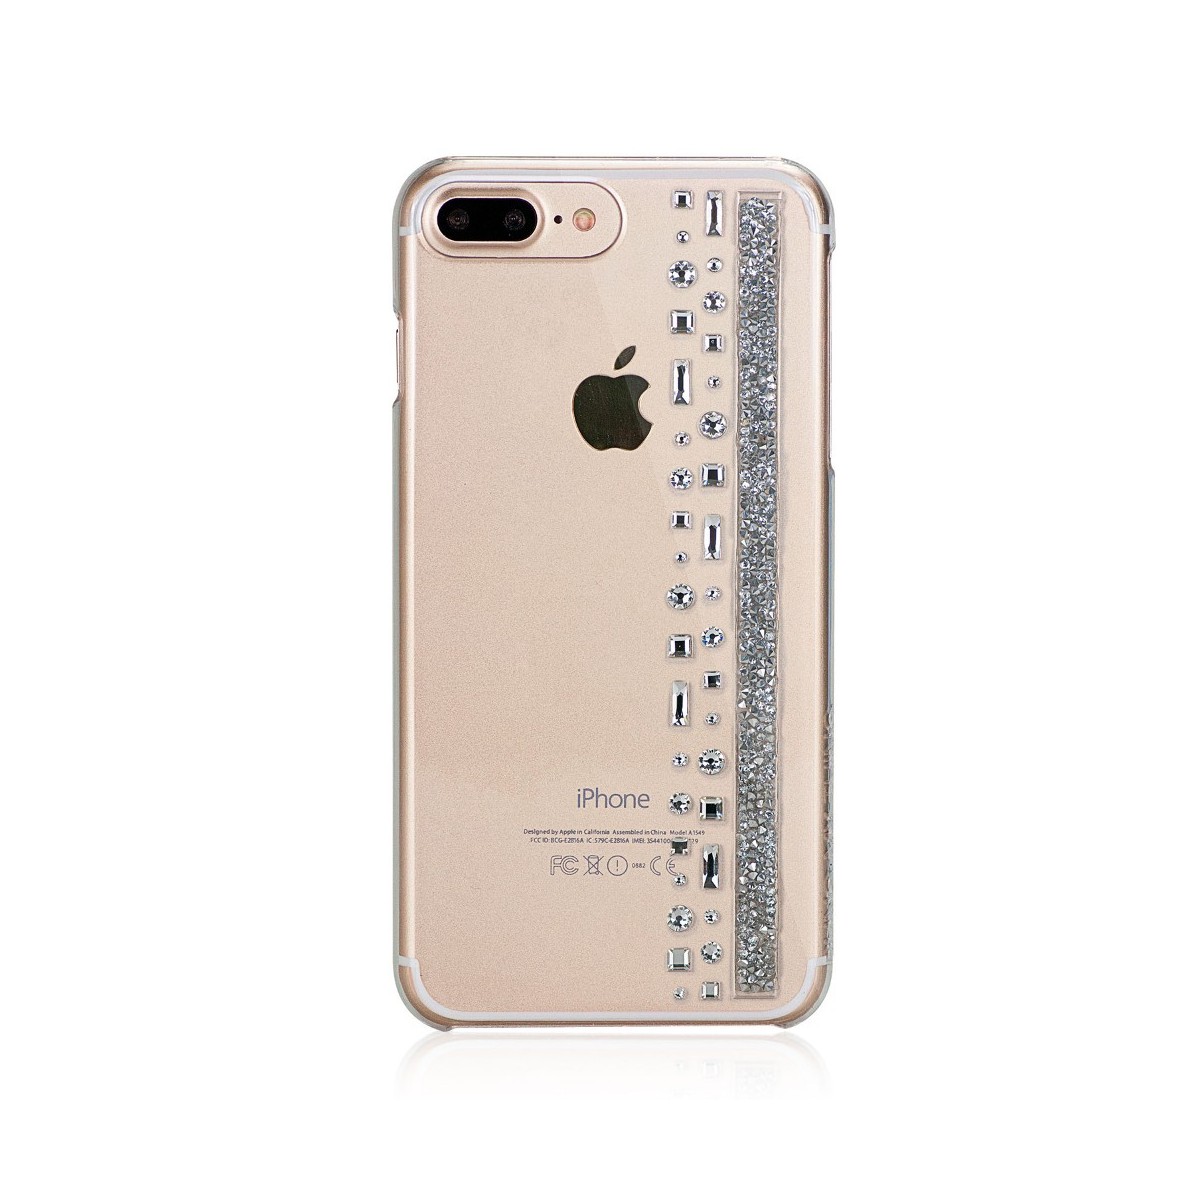 Coque iPhone 7 Plus Hermitage Crystal Strass Cristal Swarovski - Bling My Thing